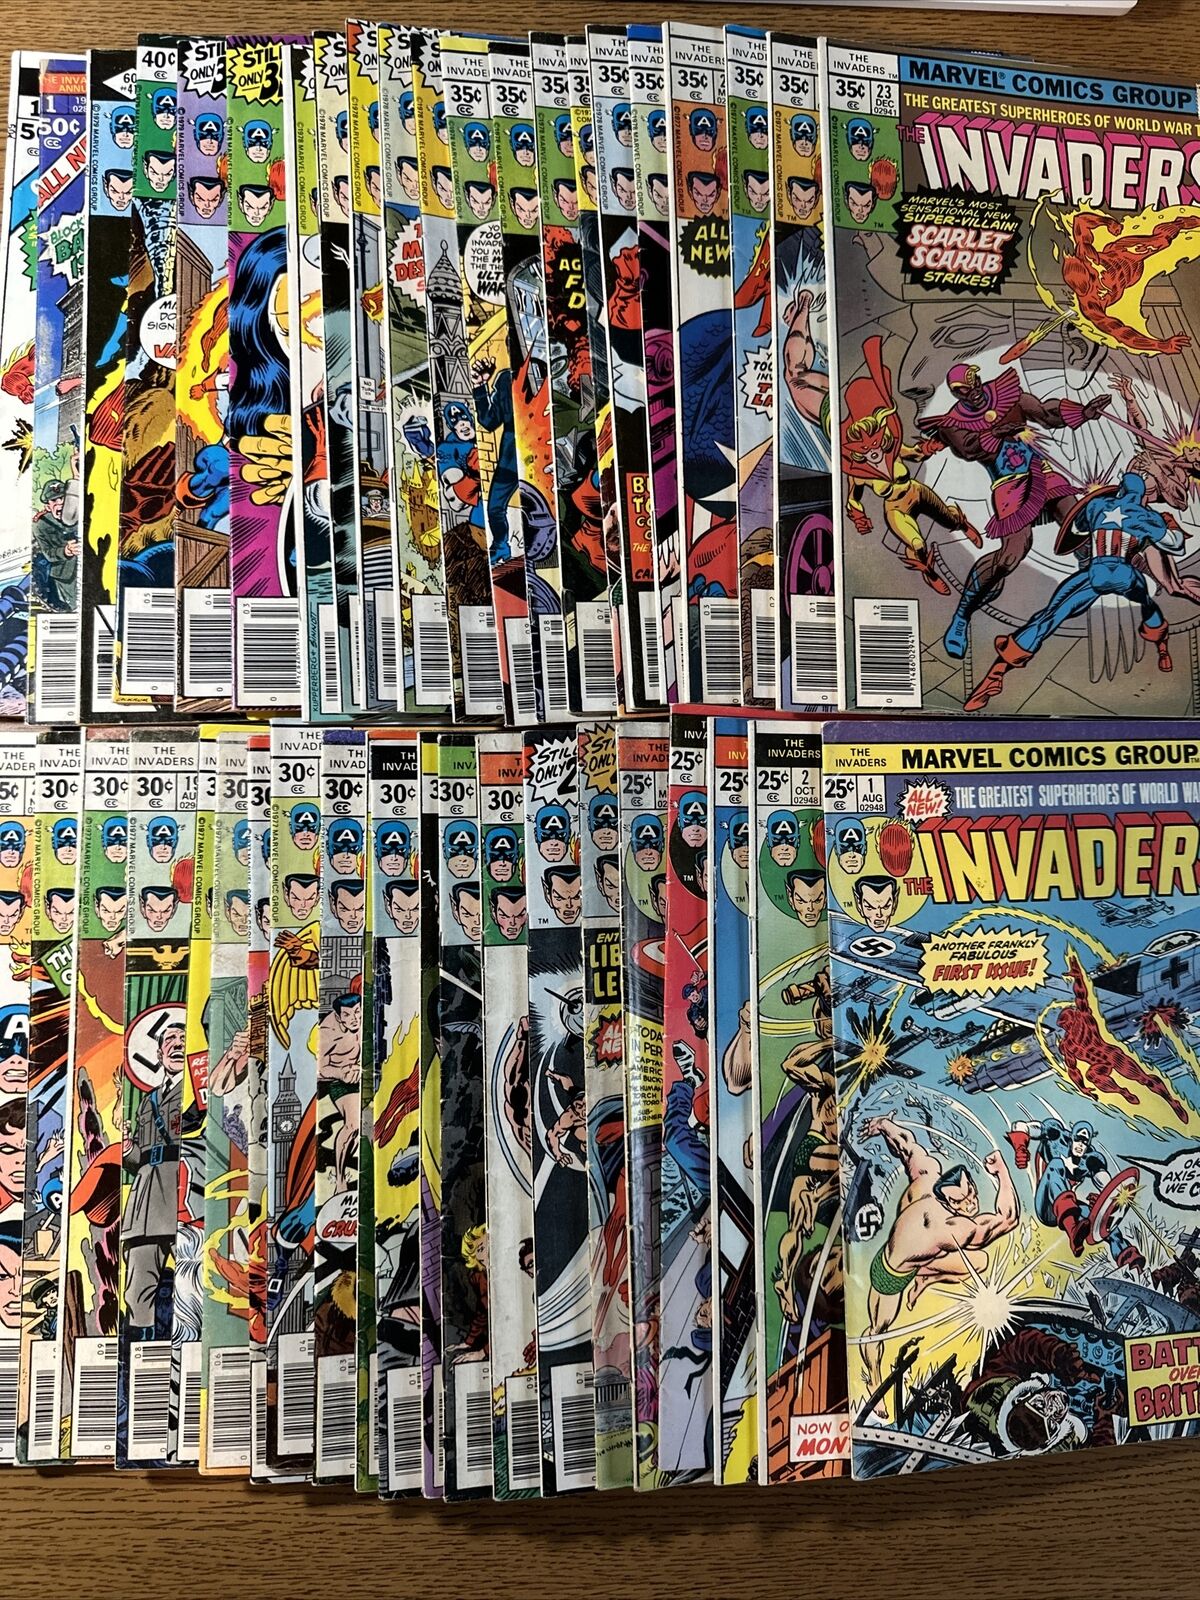 Invaders #1-41 COMPLETE Lot Run Set Giant Size #1 king size 1 Marvel Comics 1975